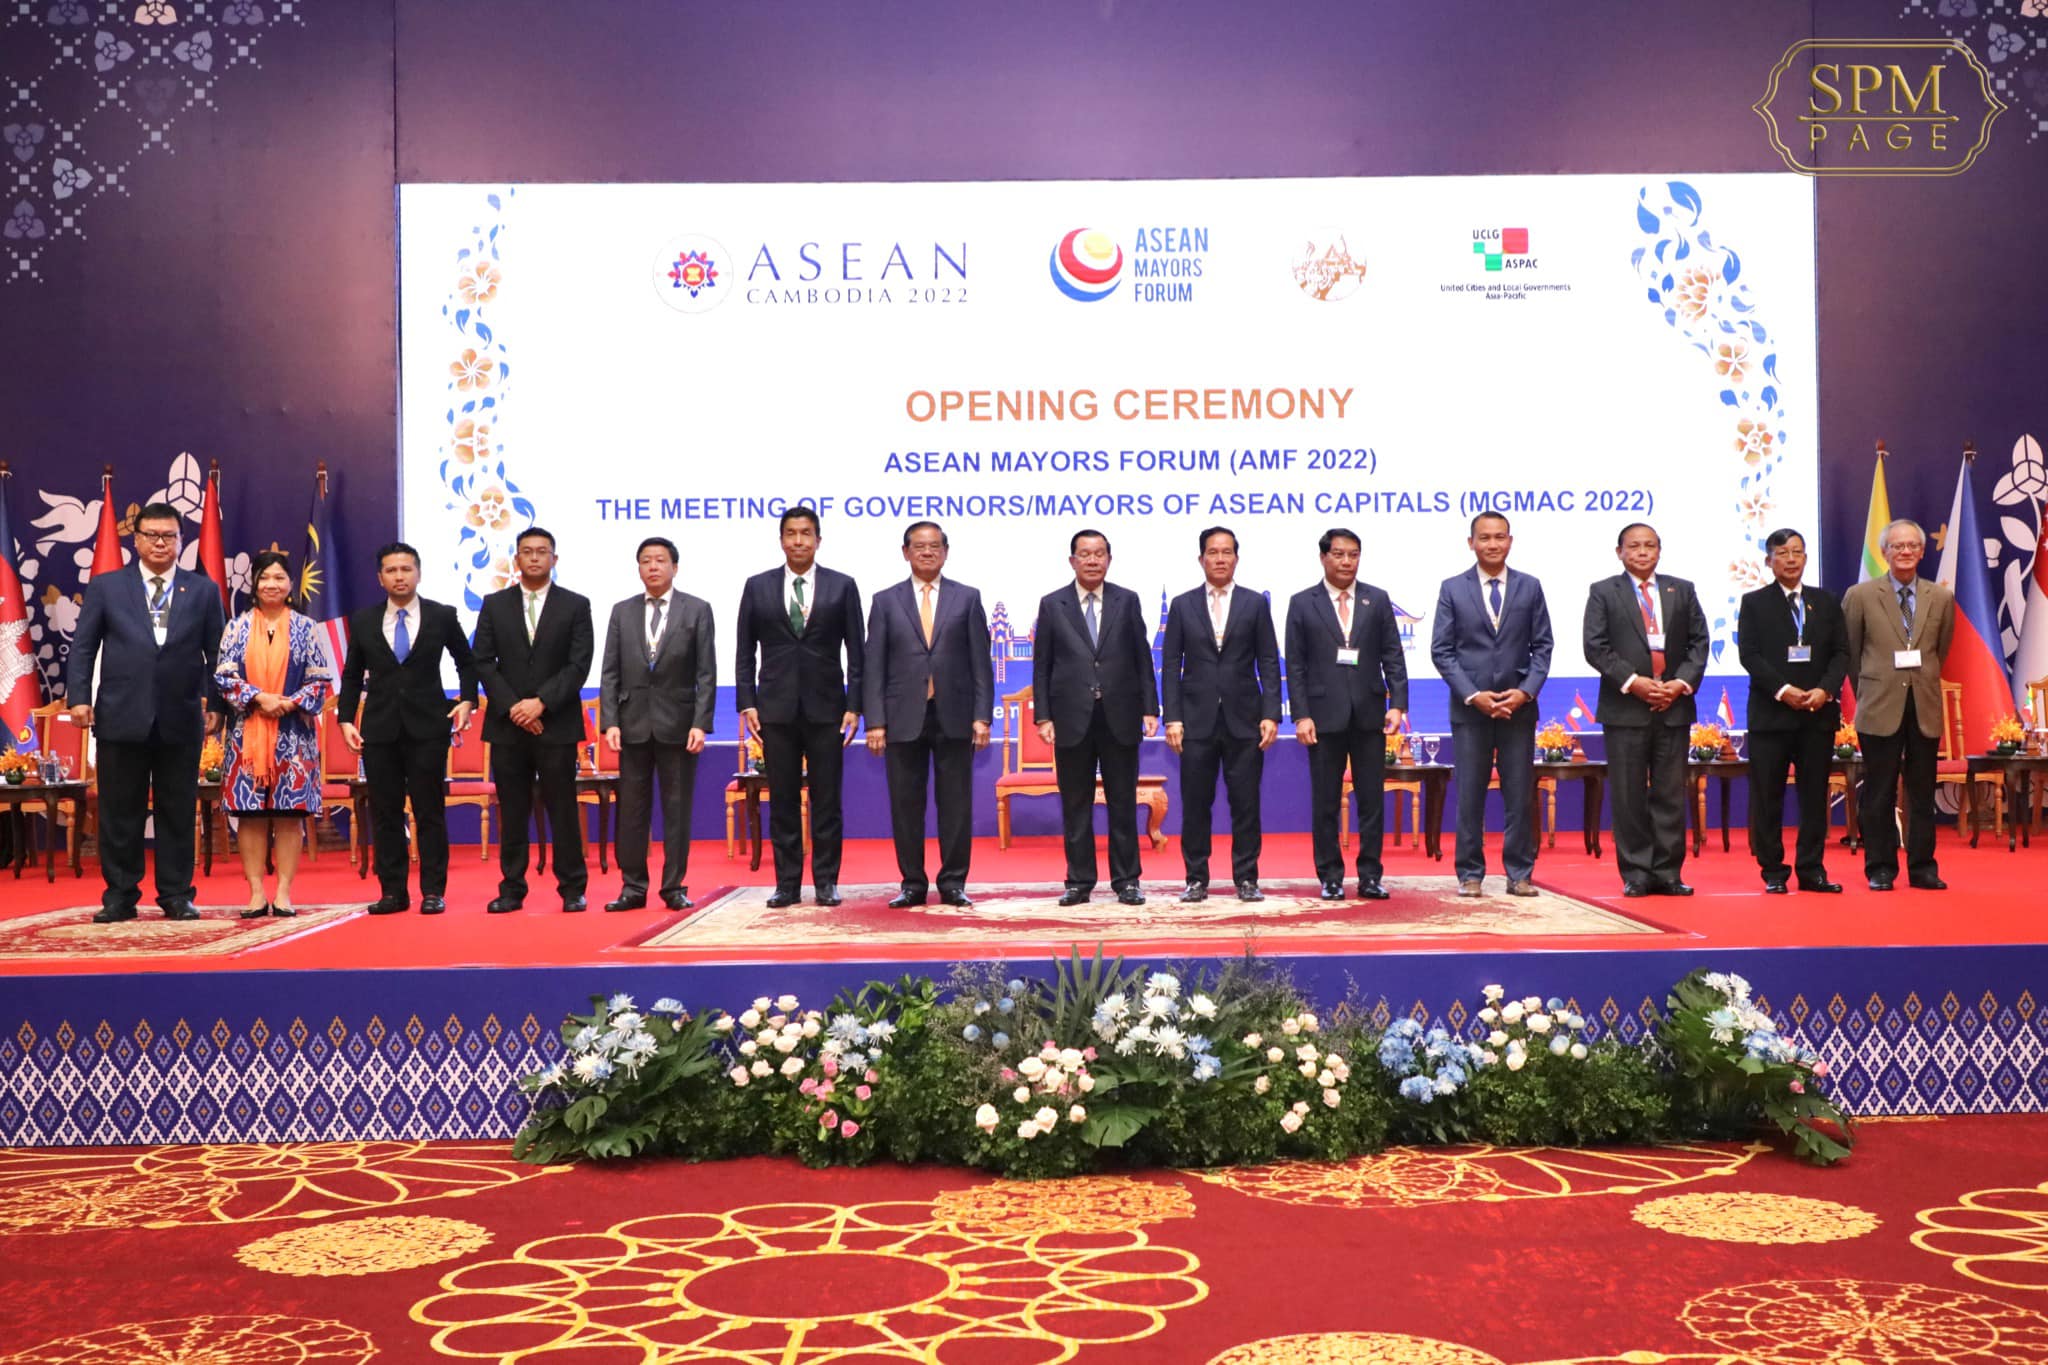 In the morning of December 2, 2022, Samdech Techo Hun Sen presides over the opening of the ASEAN Mayors Forum and the Meeting of Governors/Mayors of ASEAN Capitals 2022, held at Sokha Phnom Penh Hotel & Residence.